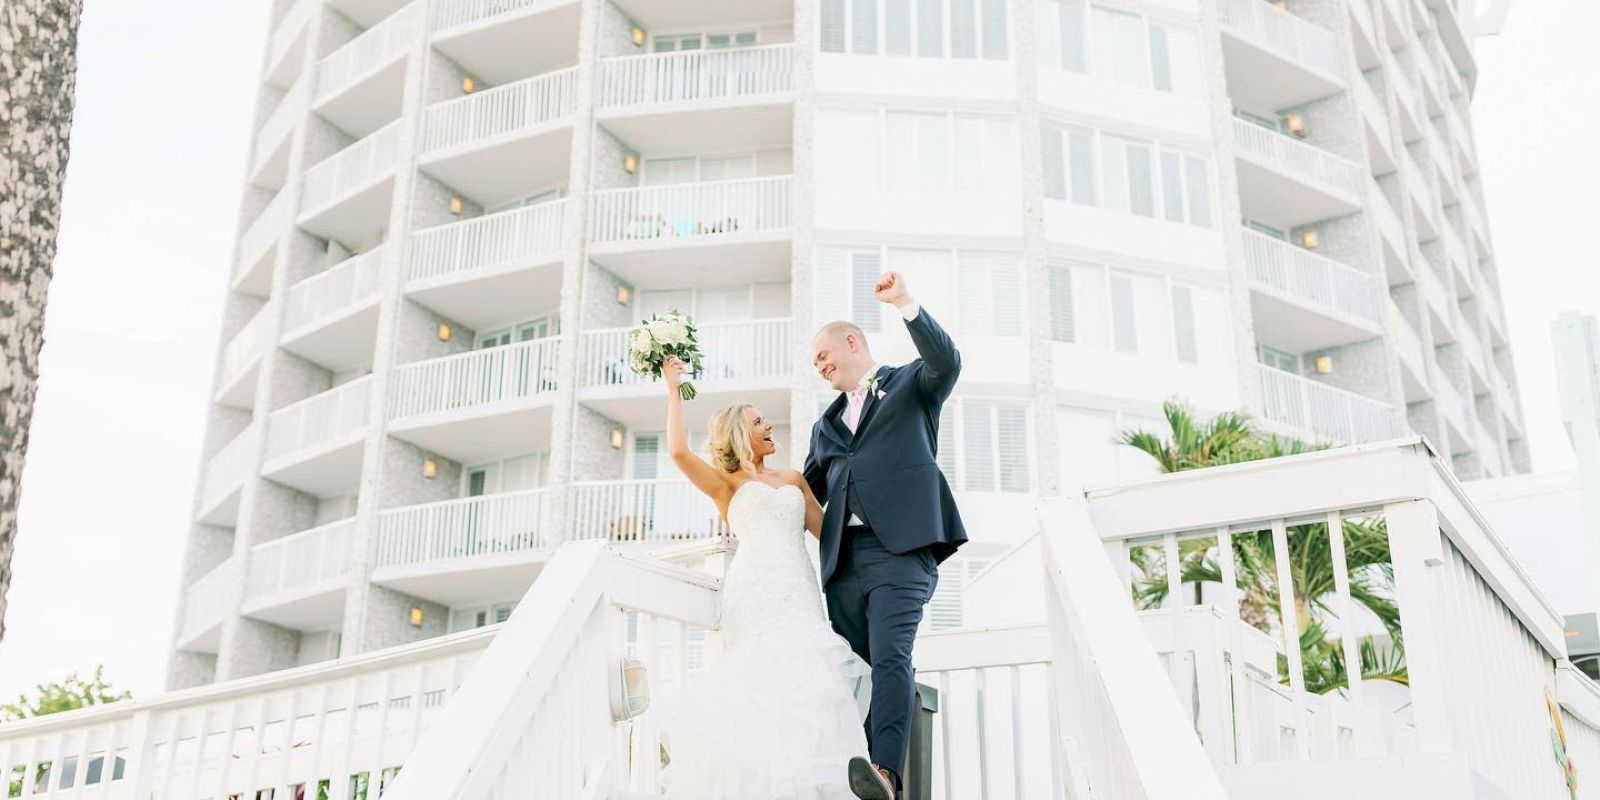 A couple in wedding attire are joyfully descending stairs with a building backdrop.